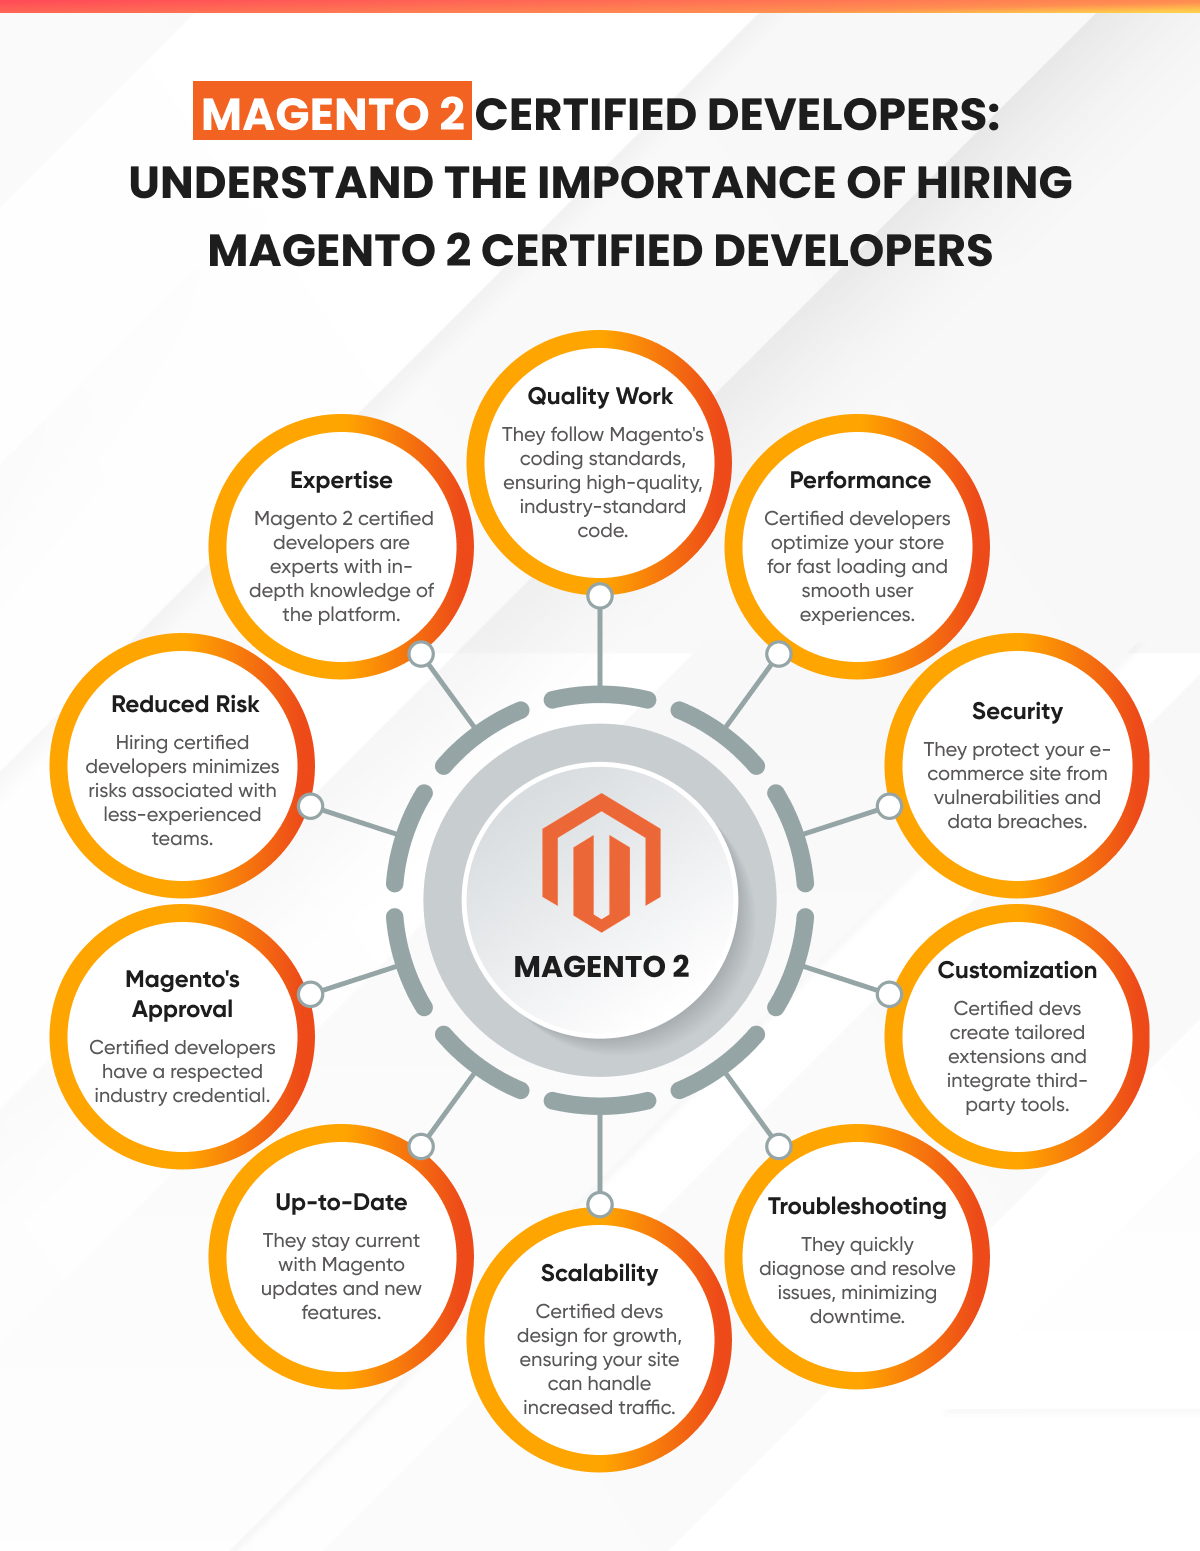 Understand the importance of hiring Magento 2 certified developers